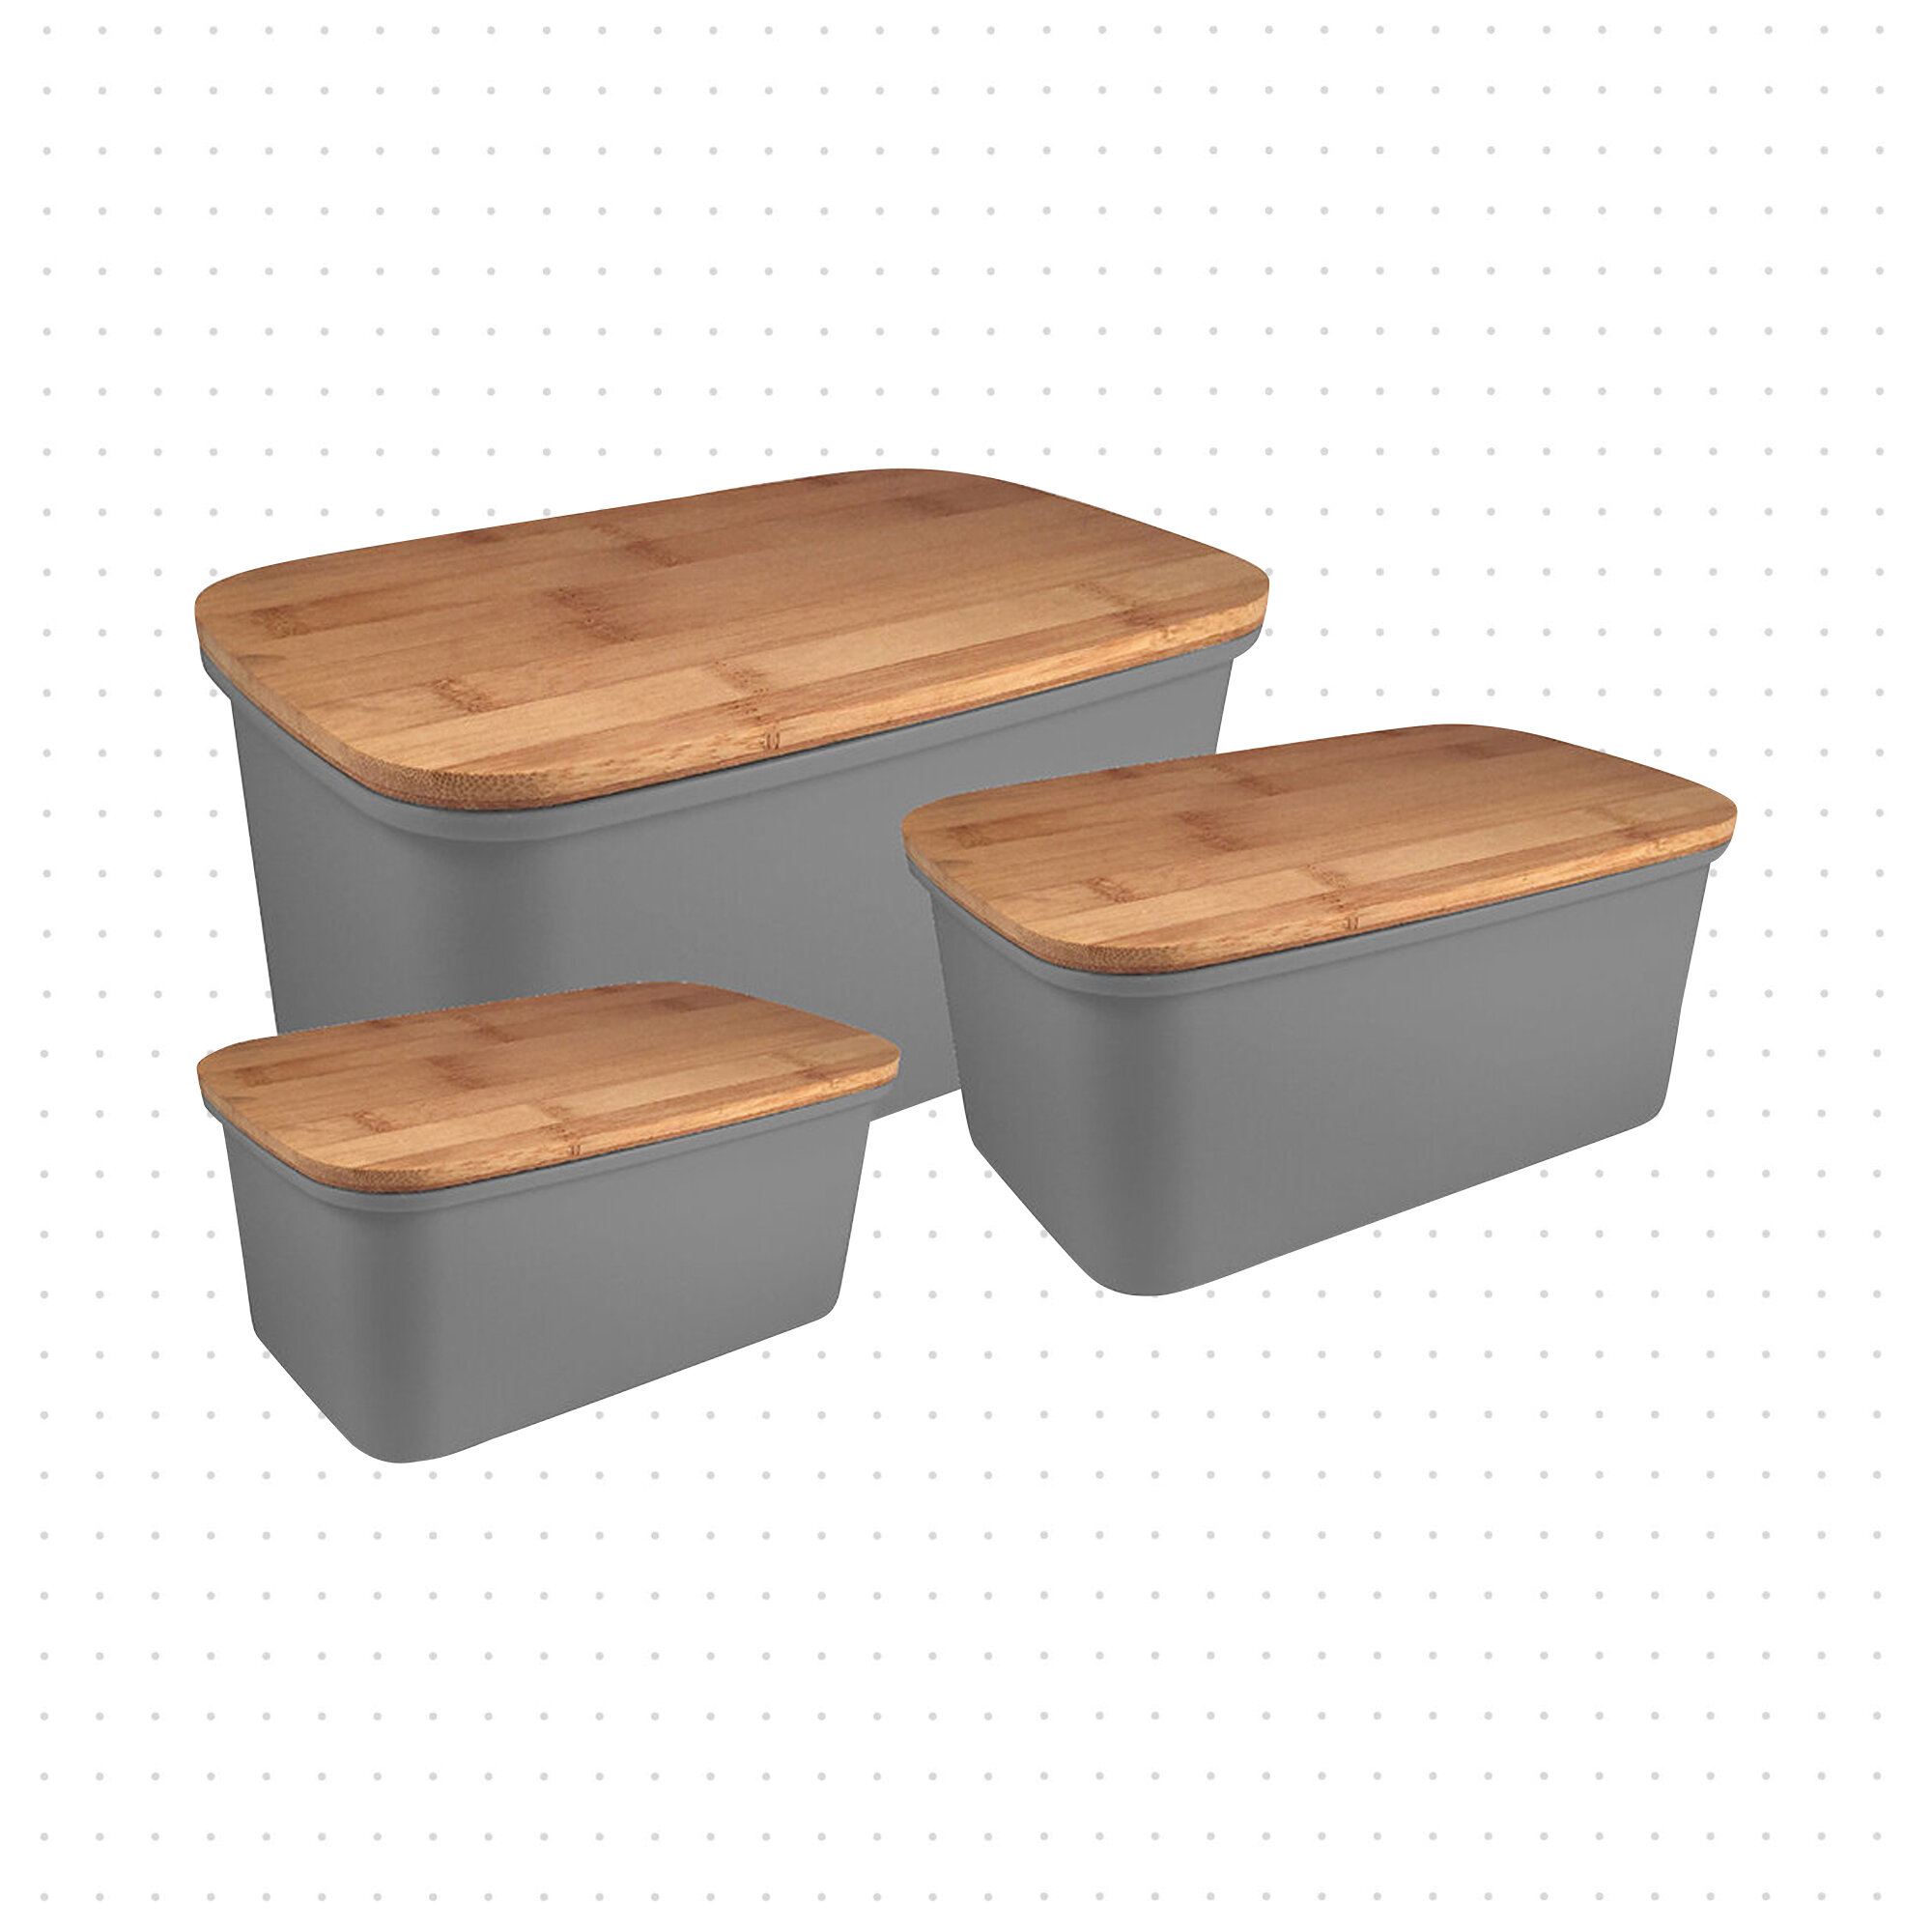 brown storage boxes with lids